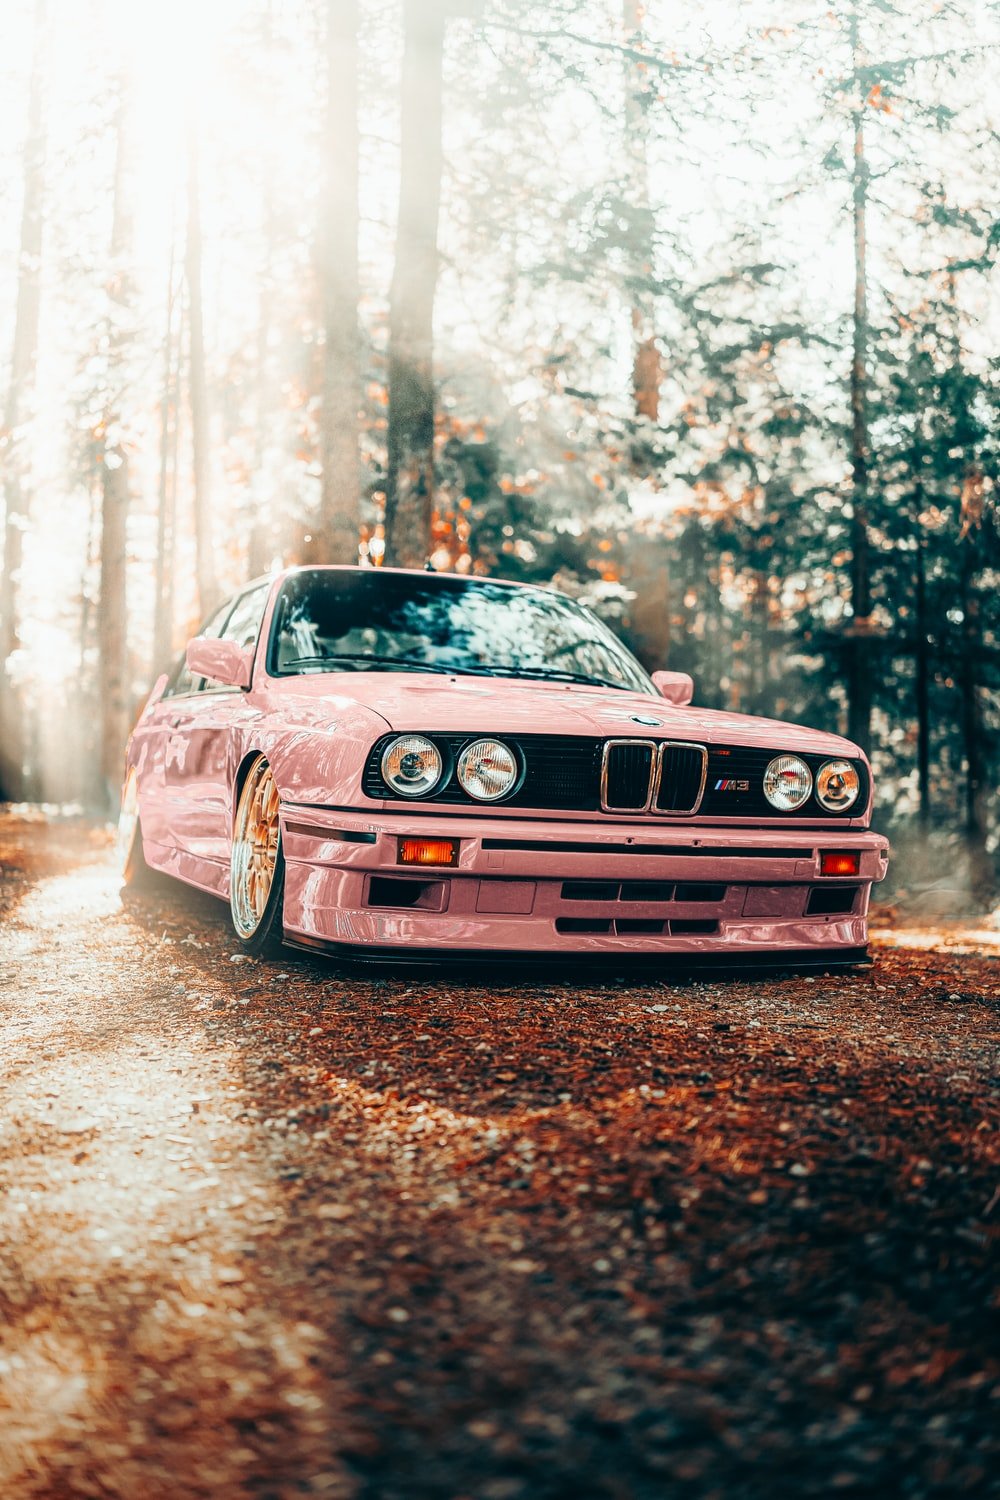 Bmw E30 Picture. Download Free Image